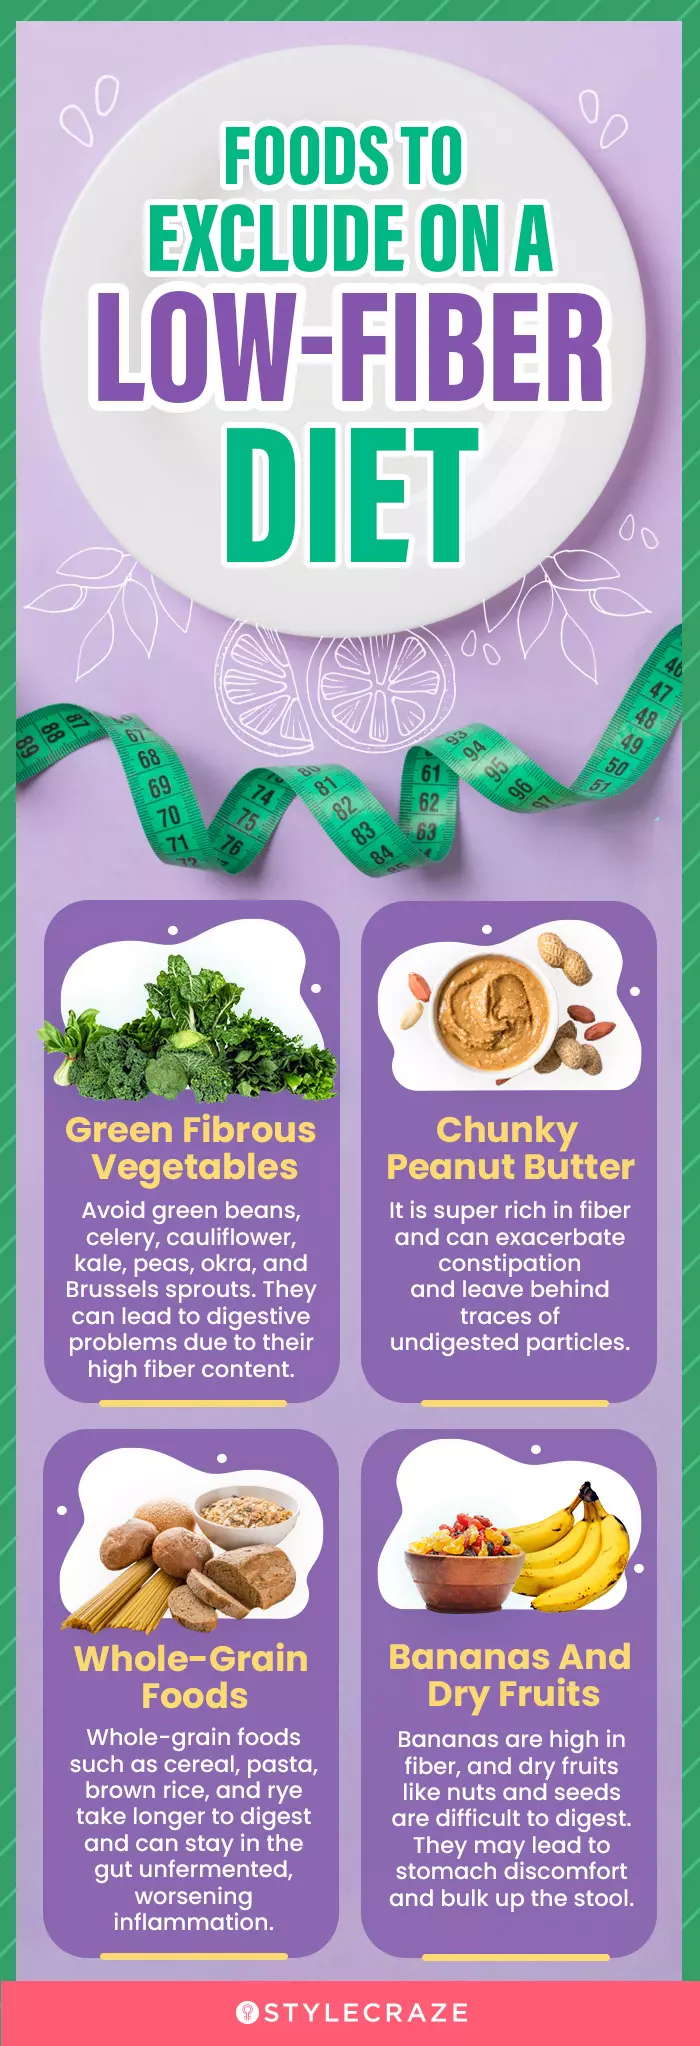 foods to exclude on a low fiber diet (infographic)